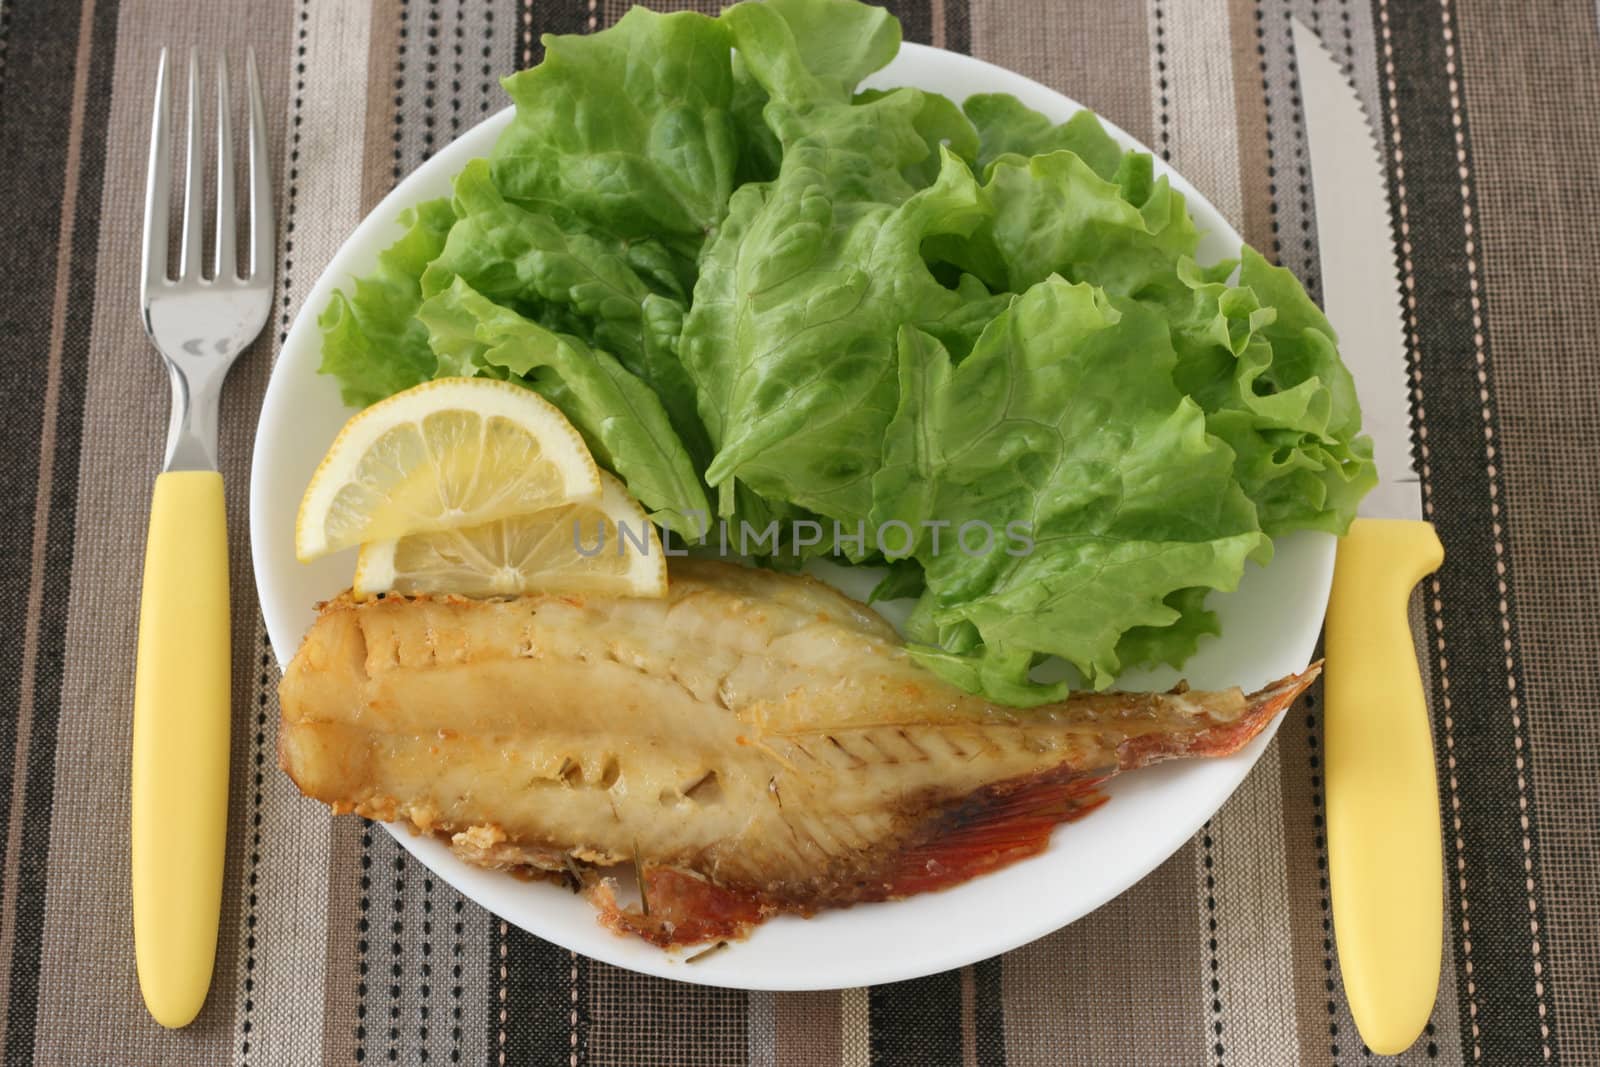 fried fish with salad